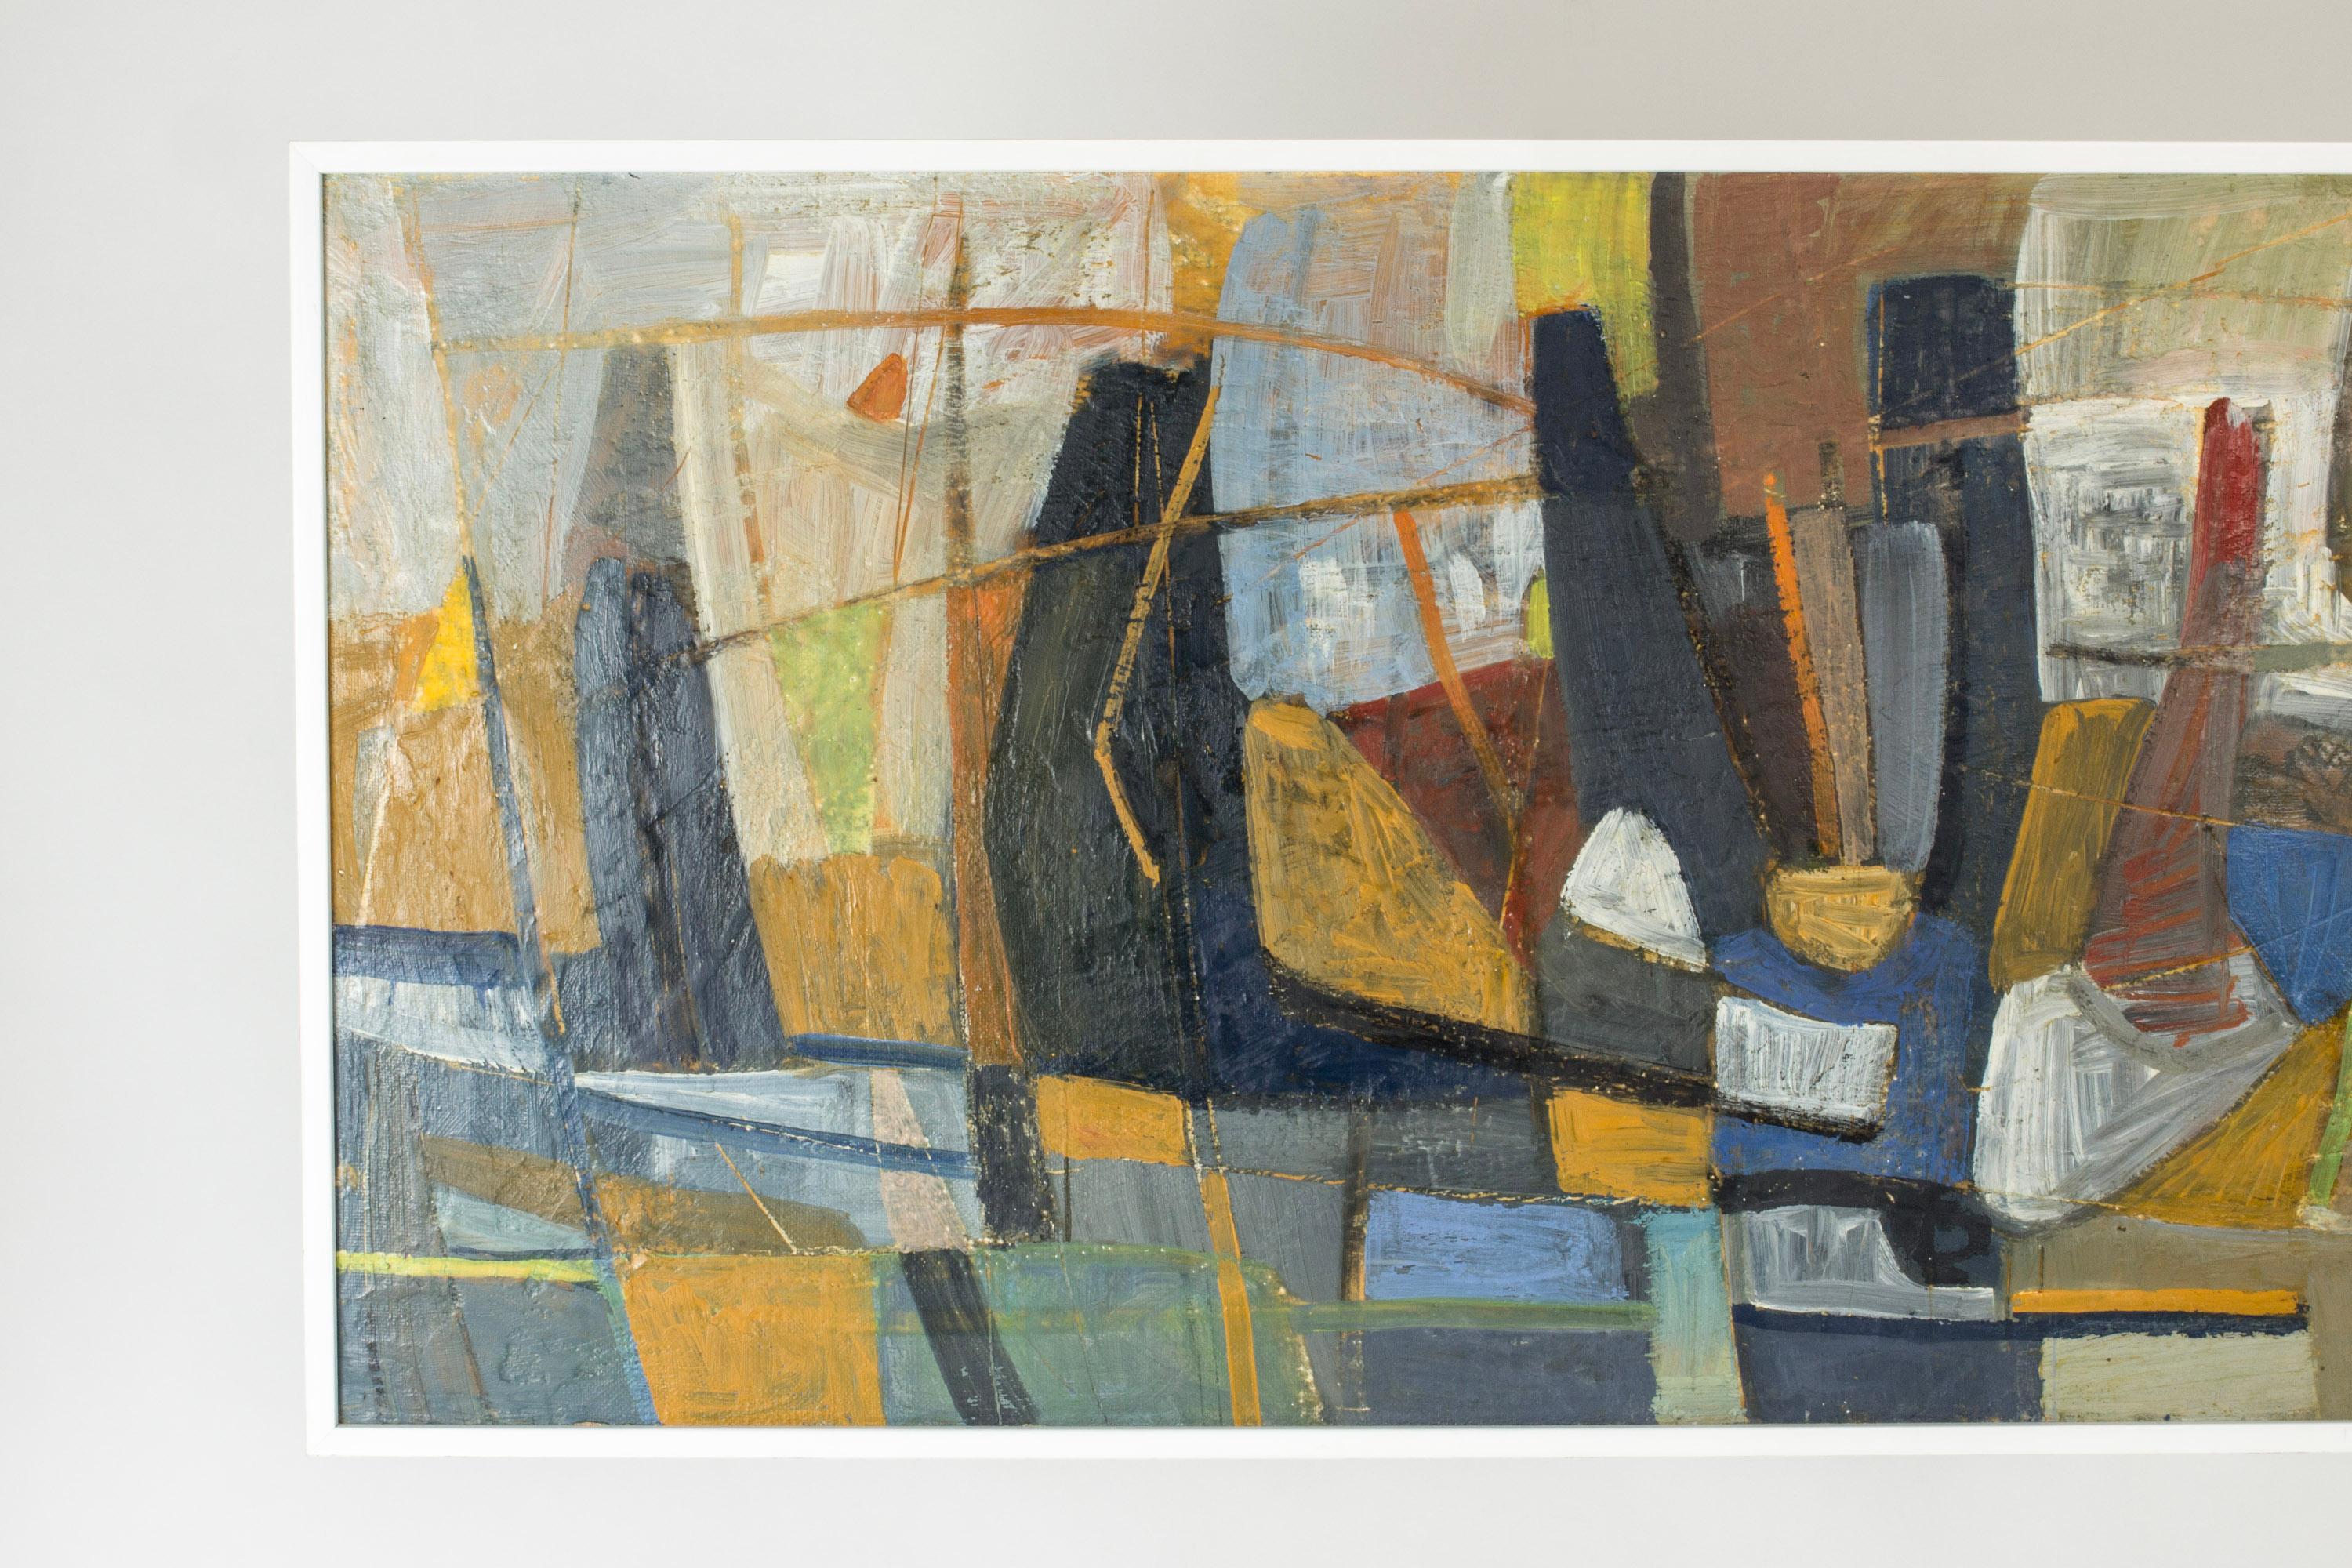 Large oil painting by Nils Wedel (1897-1967), with an abstract motif. Muted, natural colors combine with striking orange and blue in asymmetric, graphic forms.